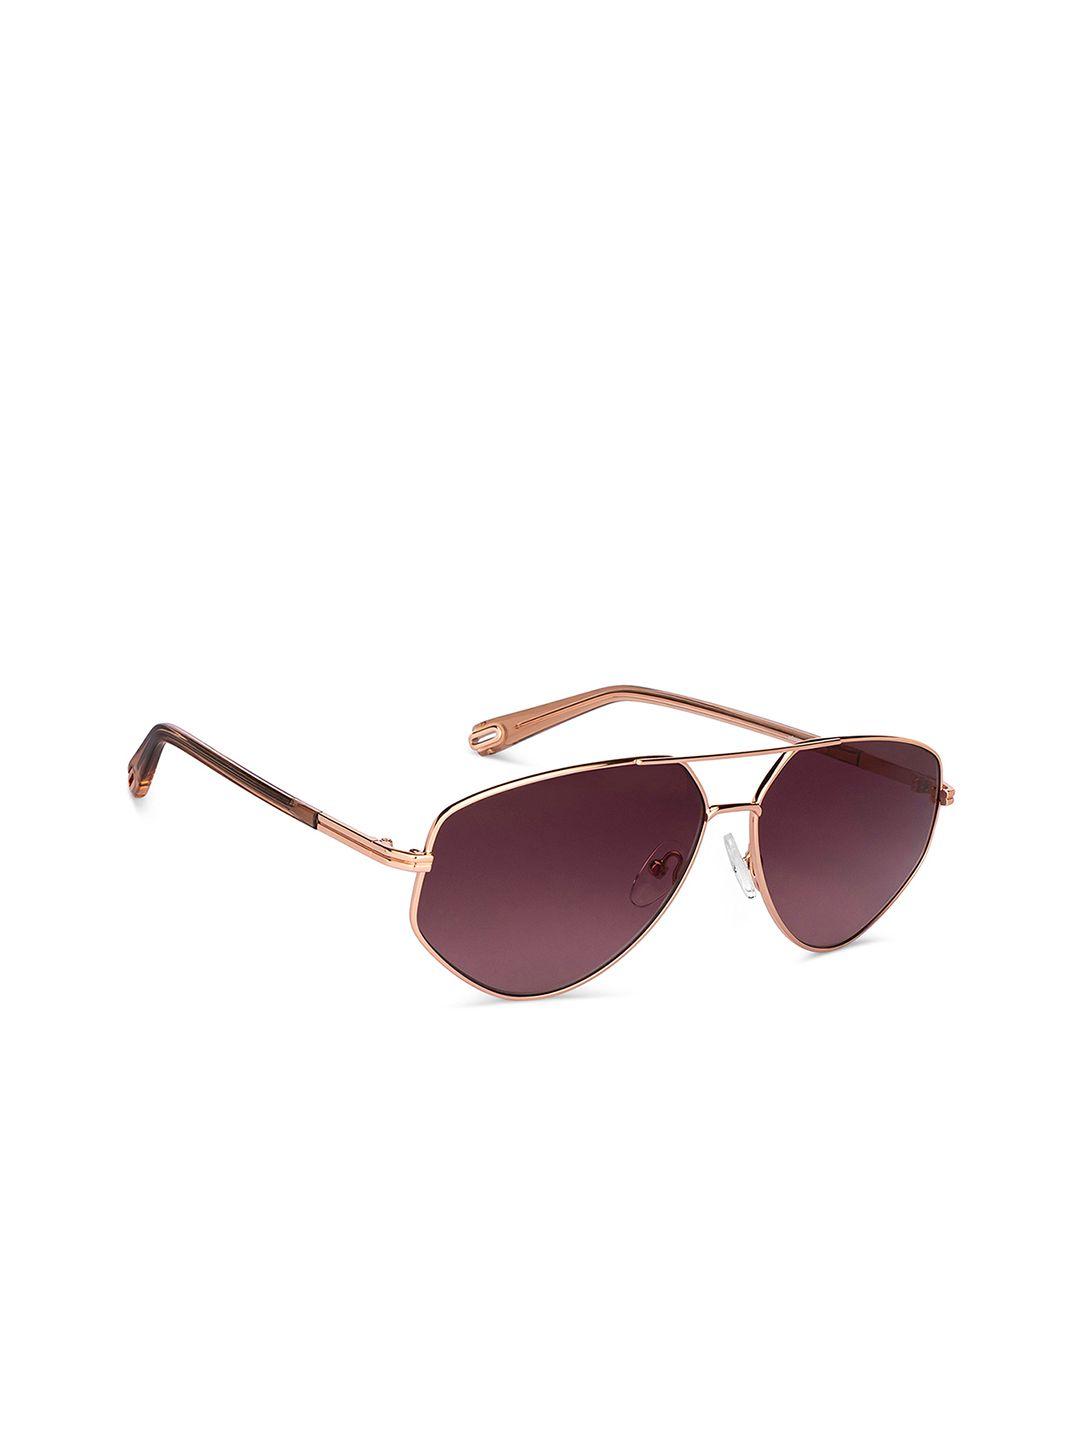 john jacobs unisex brown lens & gold-toned aviator sunglasses with uv protected lens